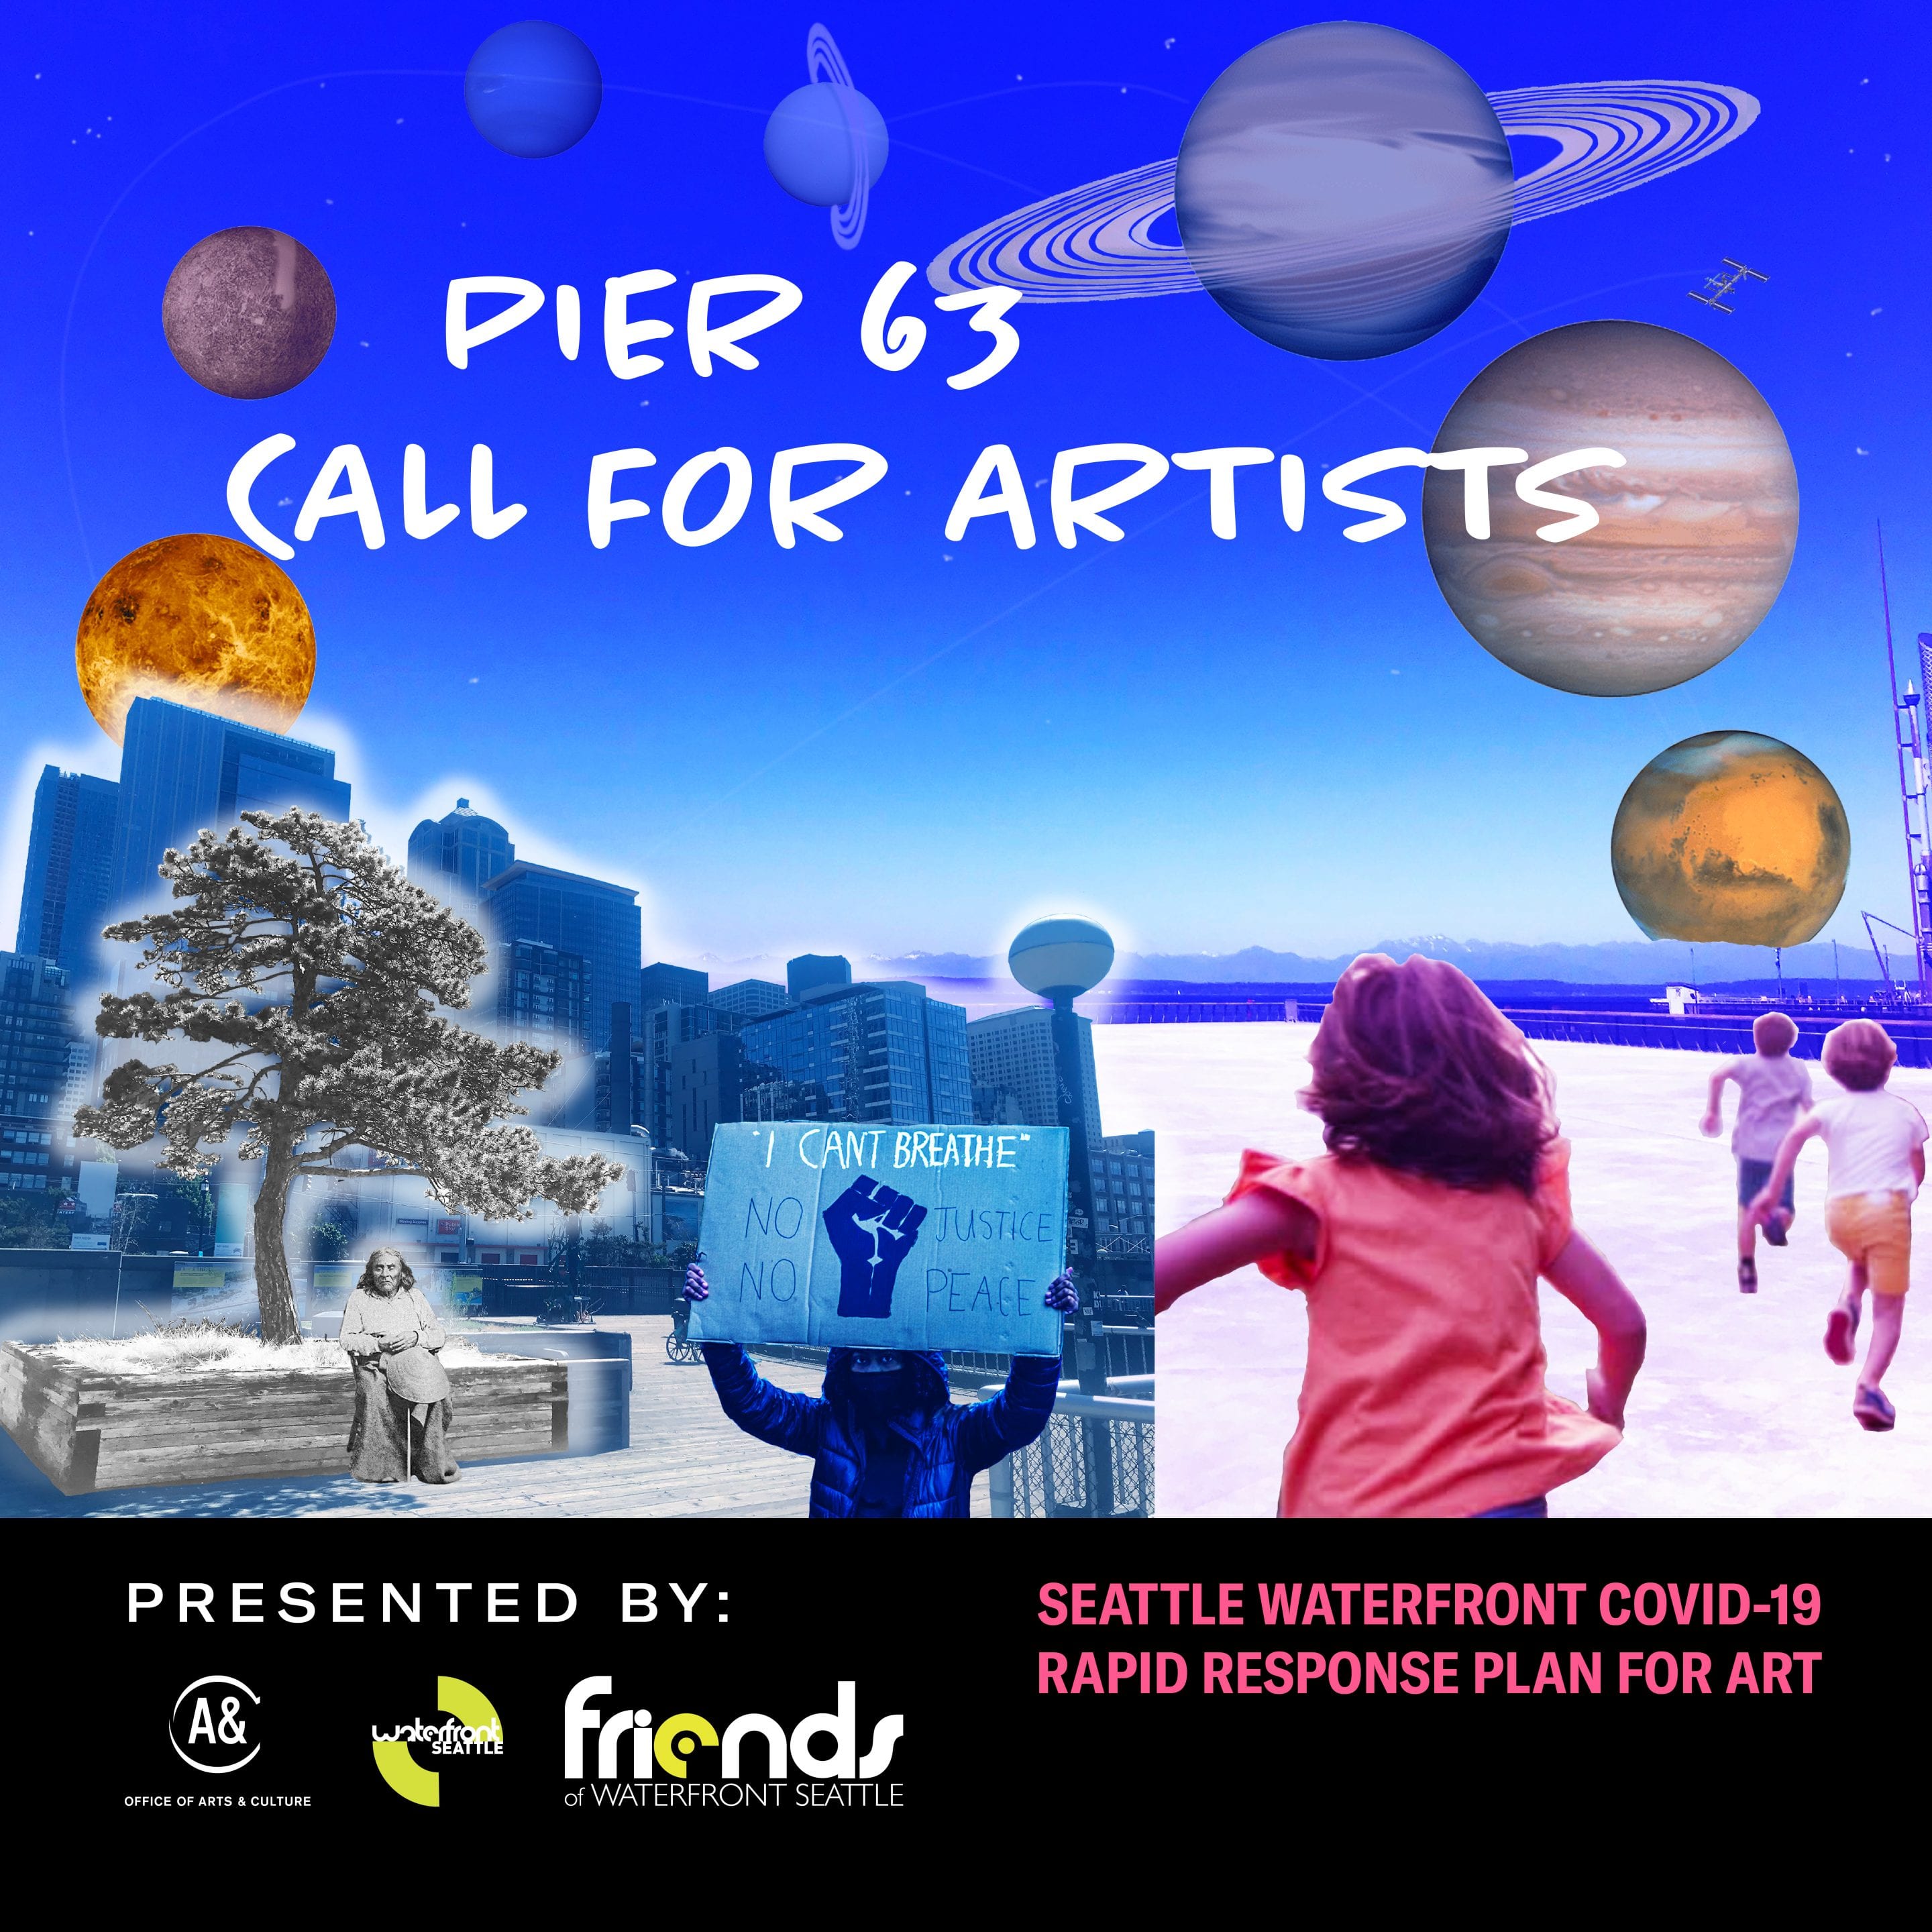 Pier 63 Call For Artists background image